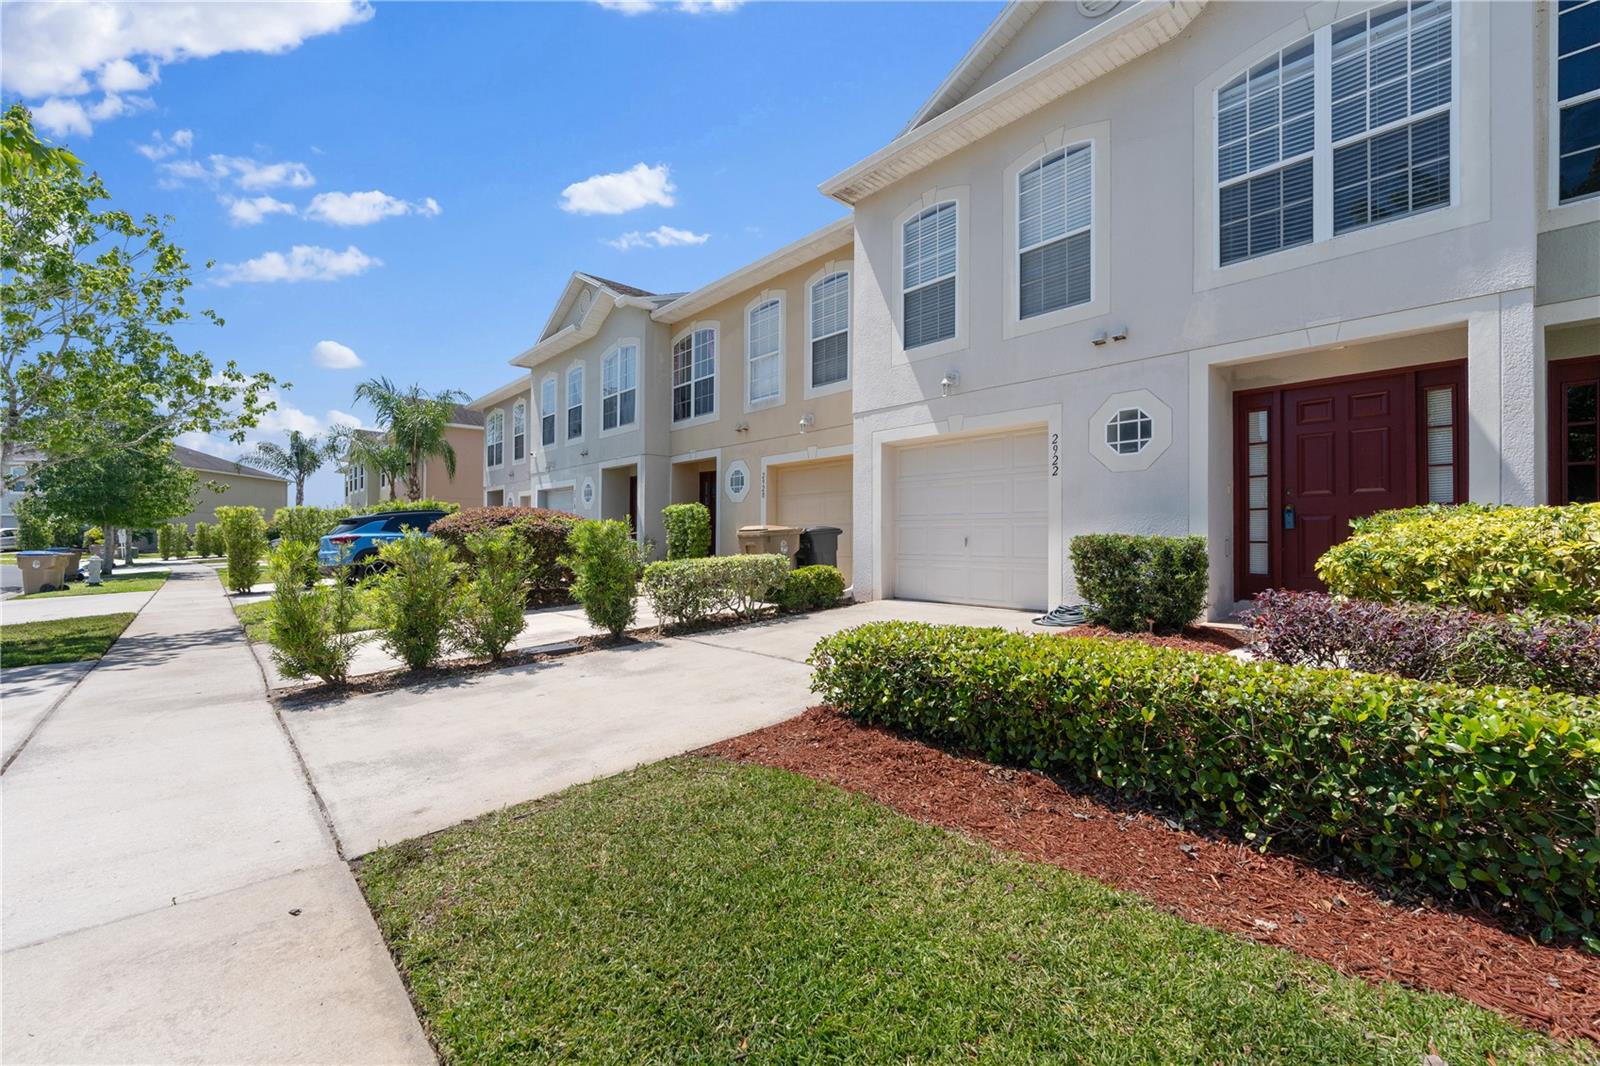 View KISSIMMEE, FL 34743 townhome